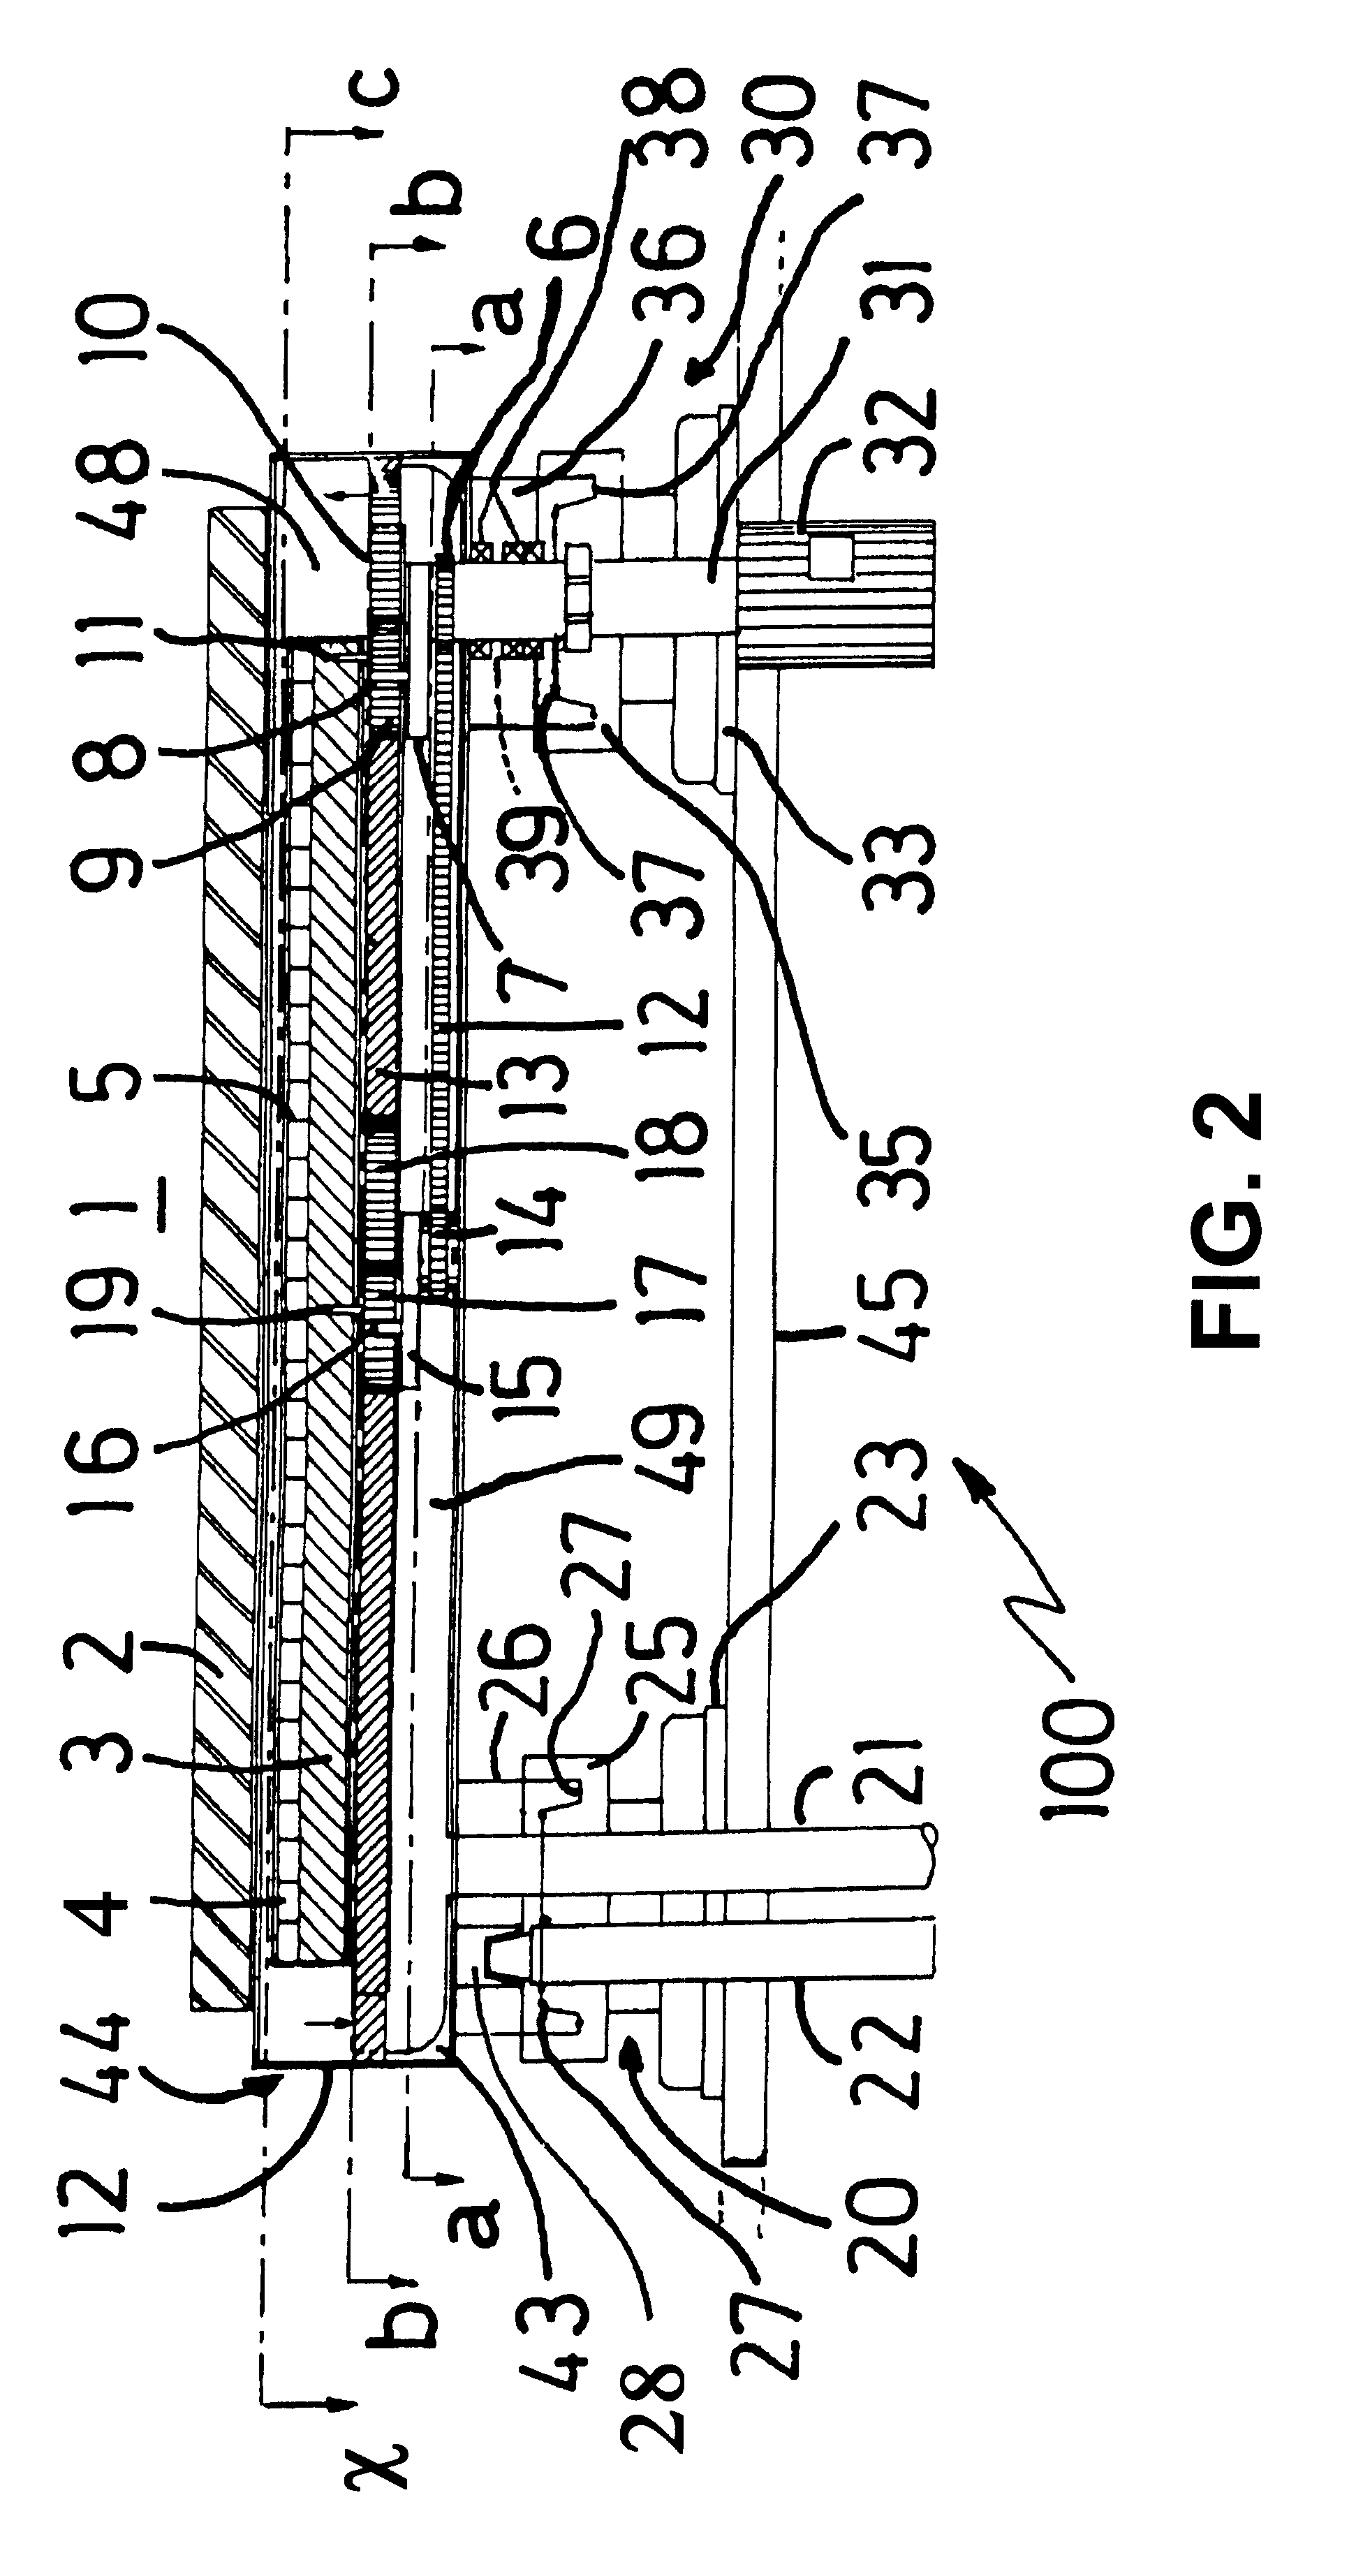 Erosion compensated magnetron with moving magnet assembly